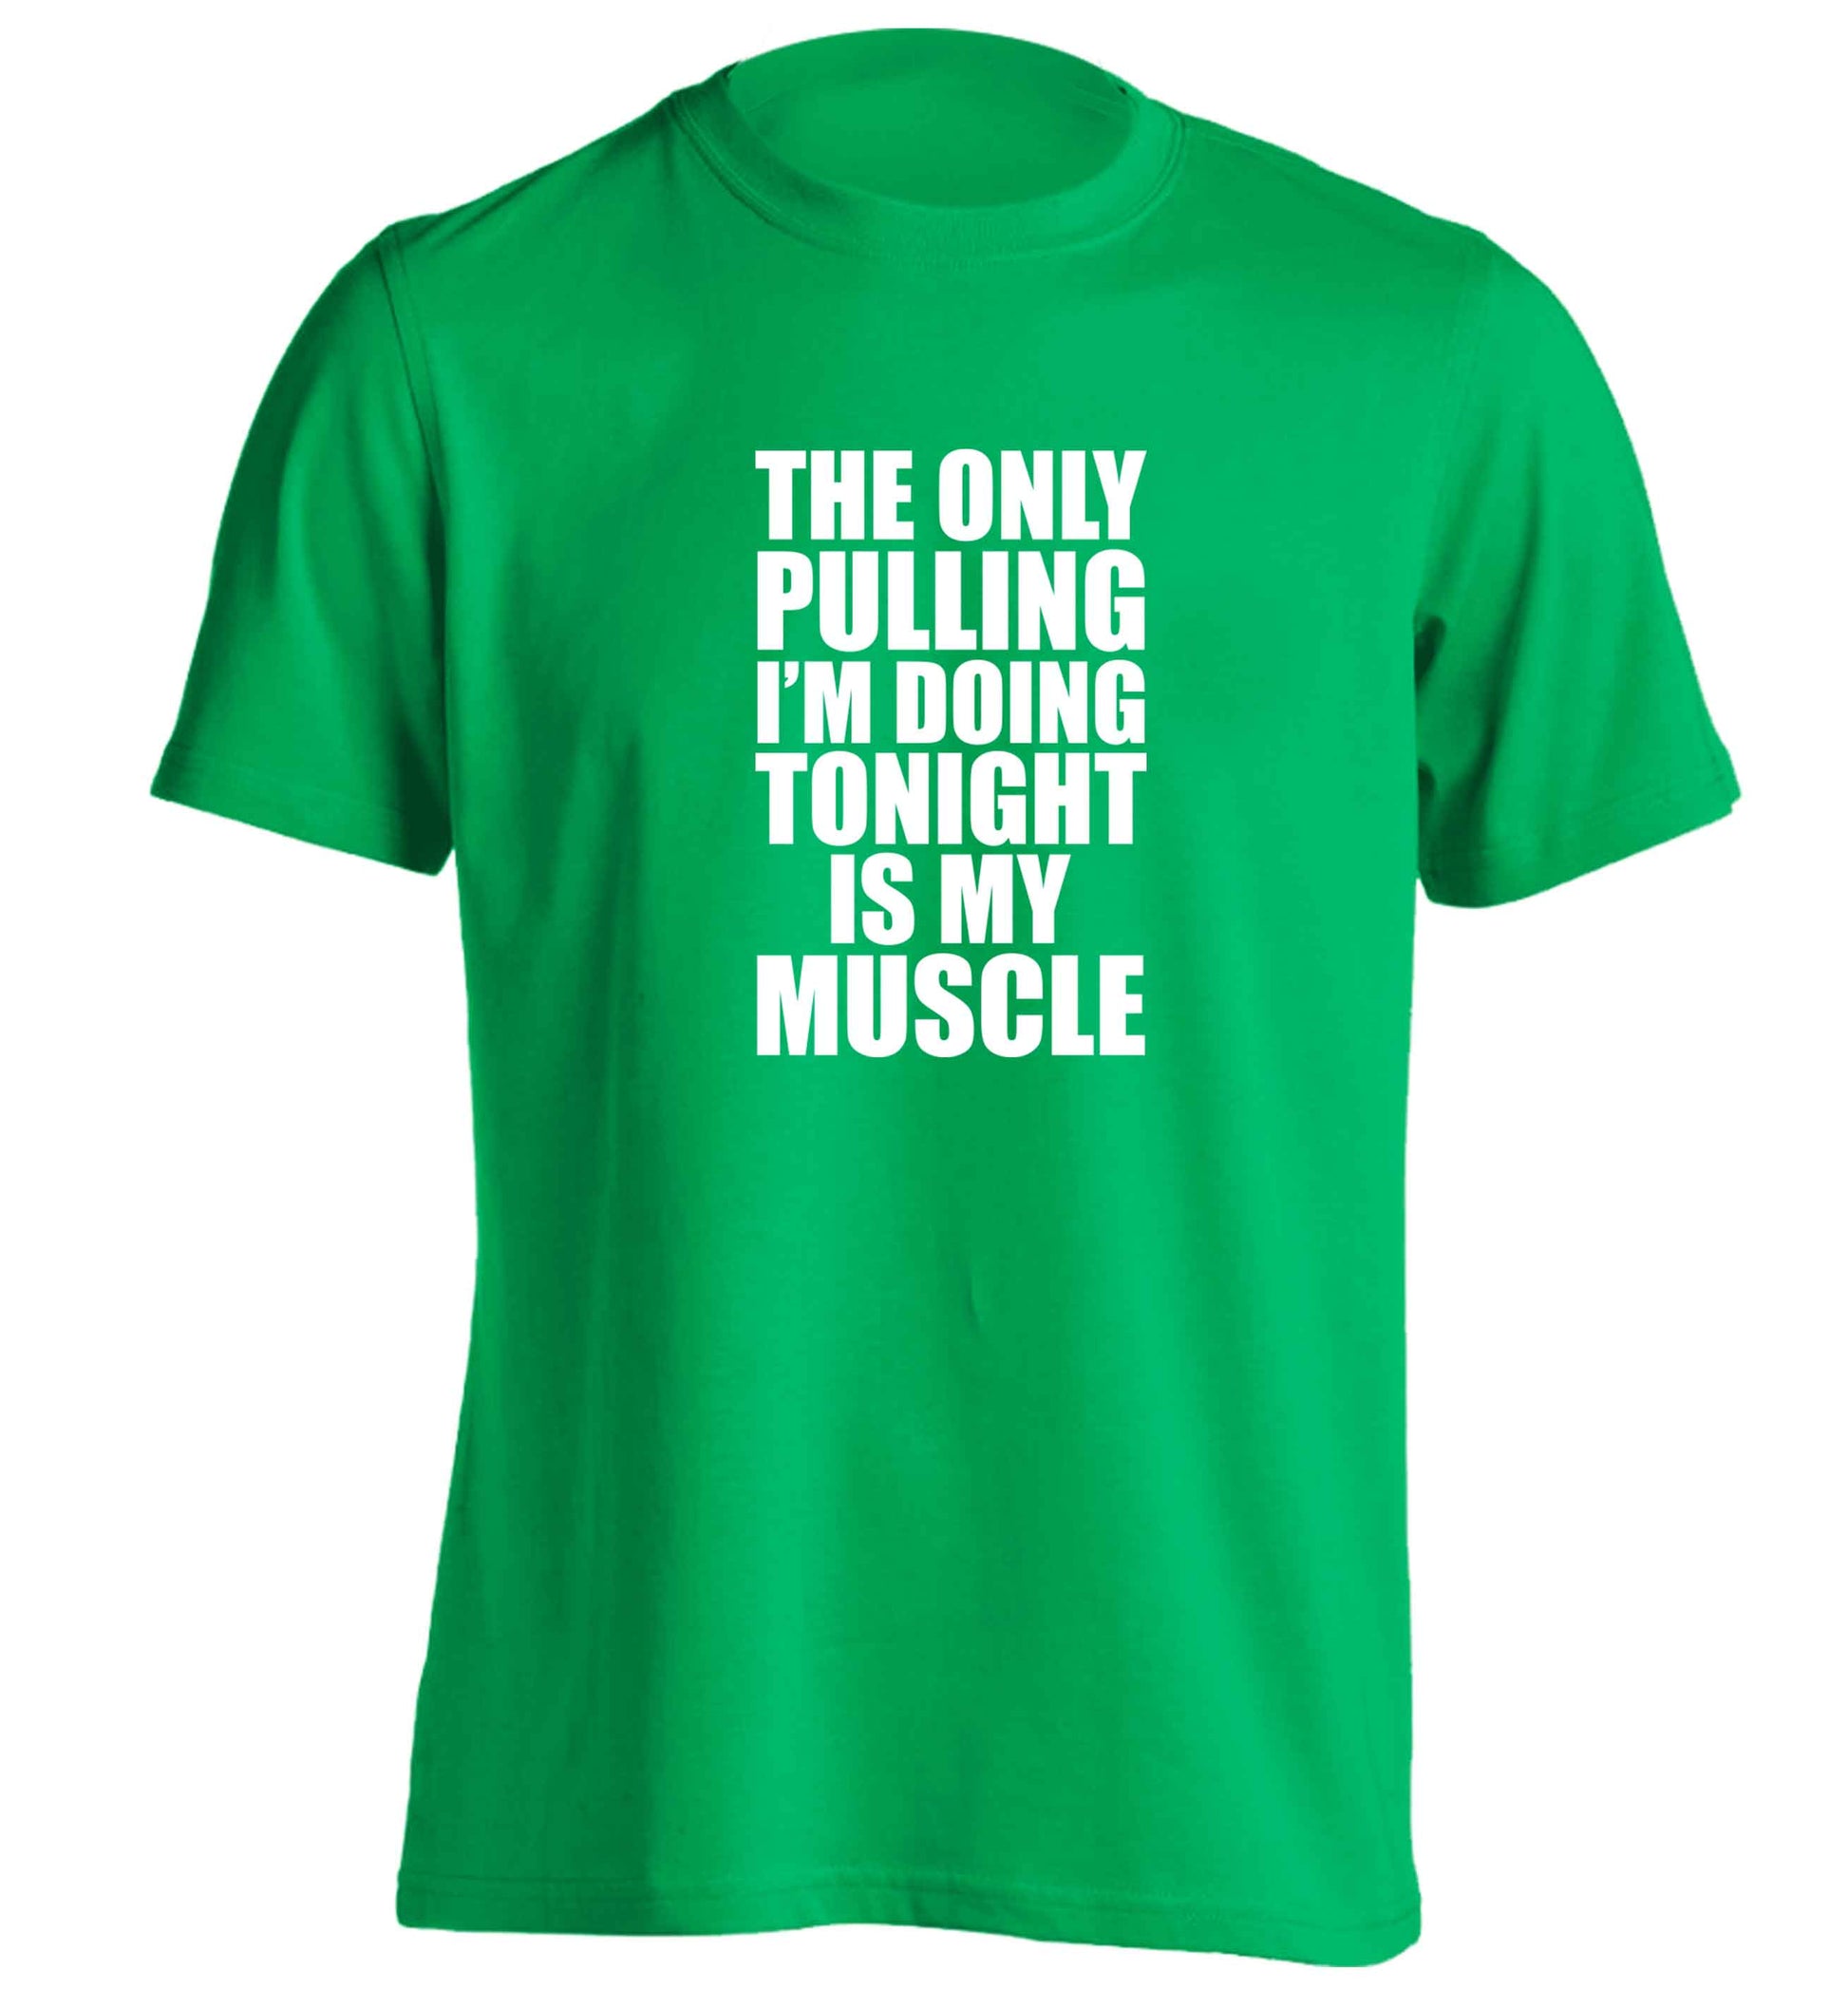 The only pulling I'm doing tonight is my muscle adults unisex green Tshirt 2XL